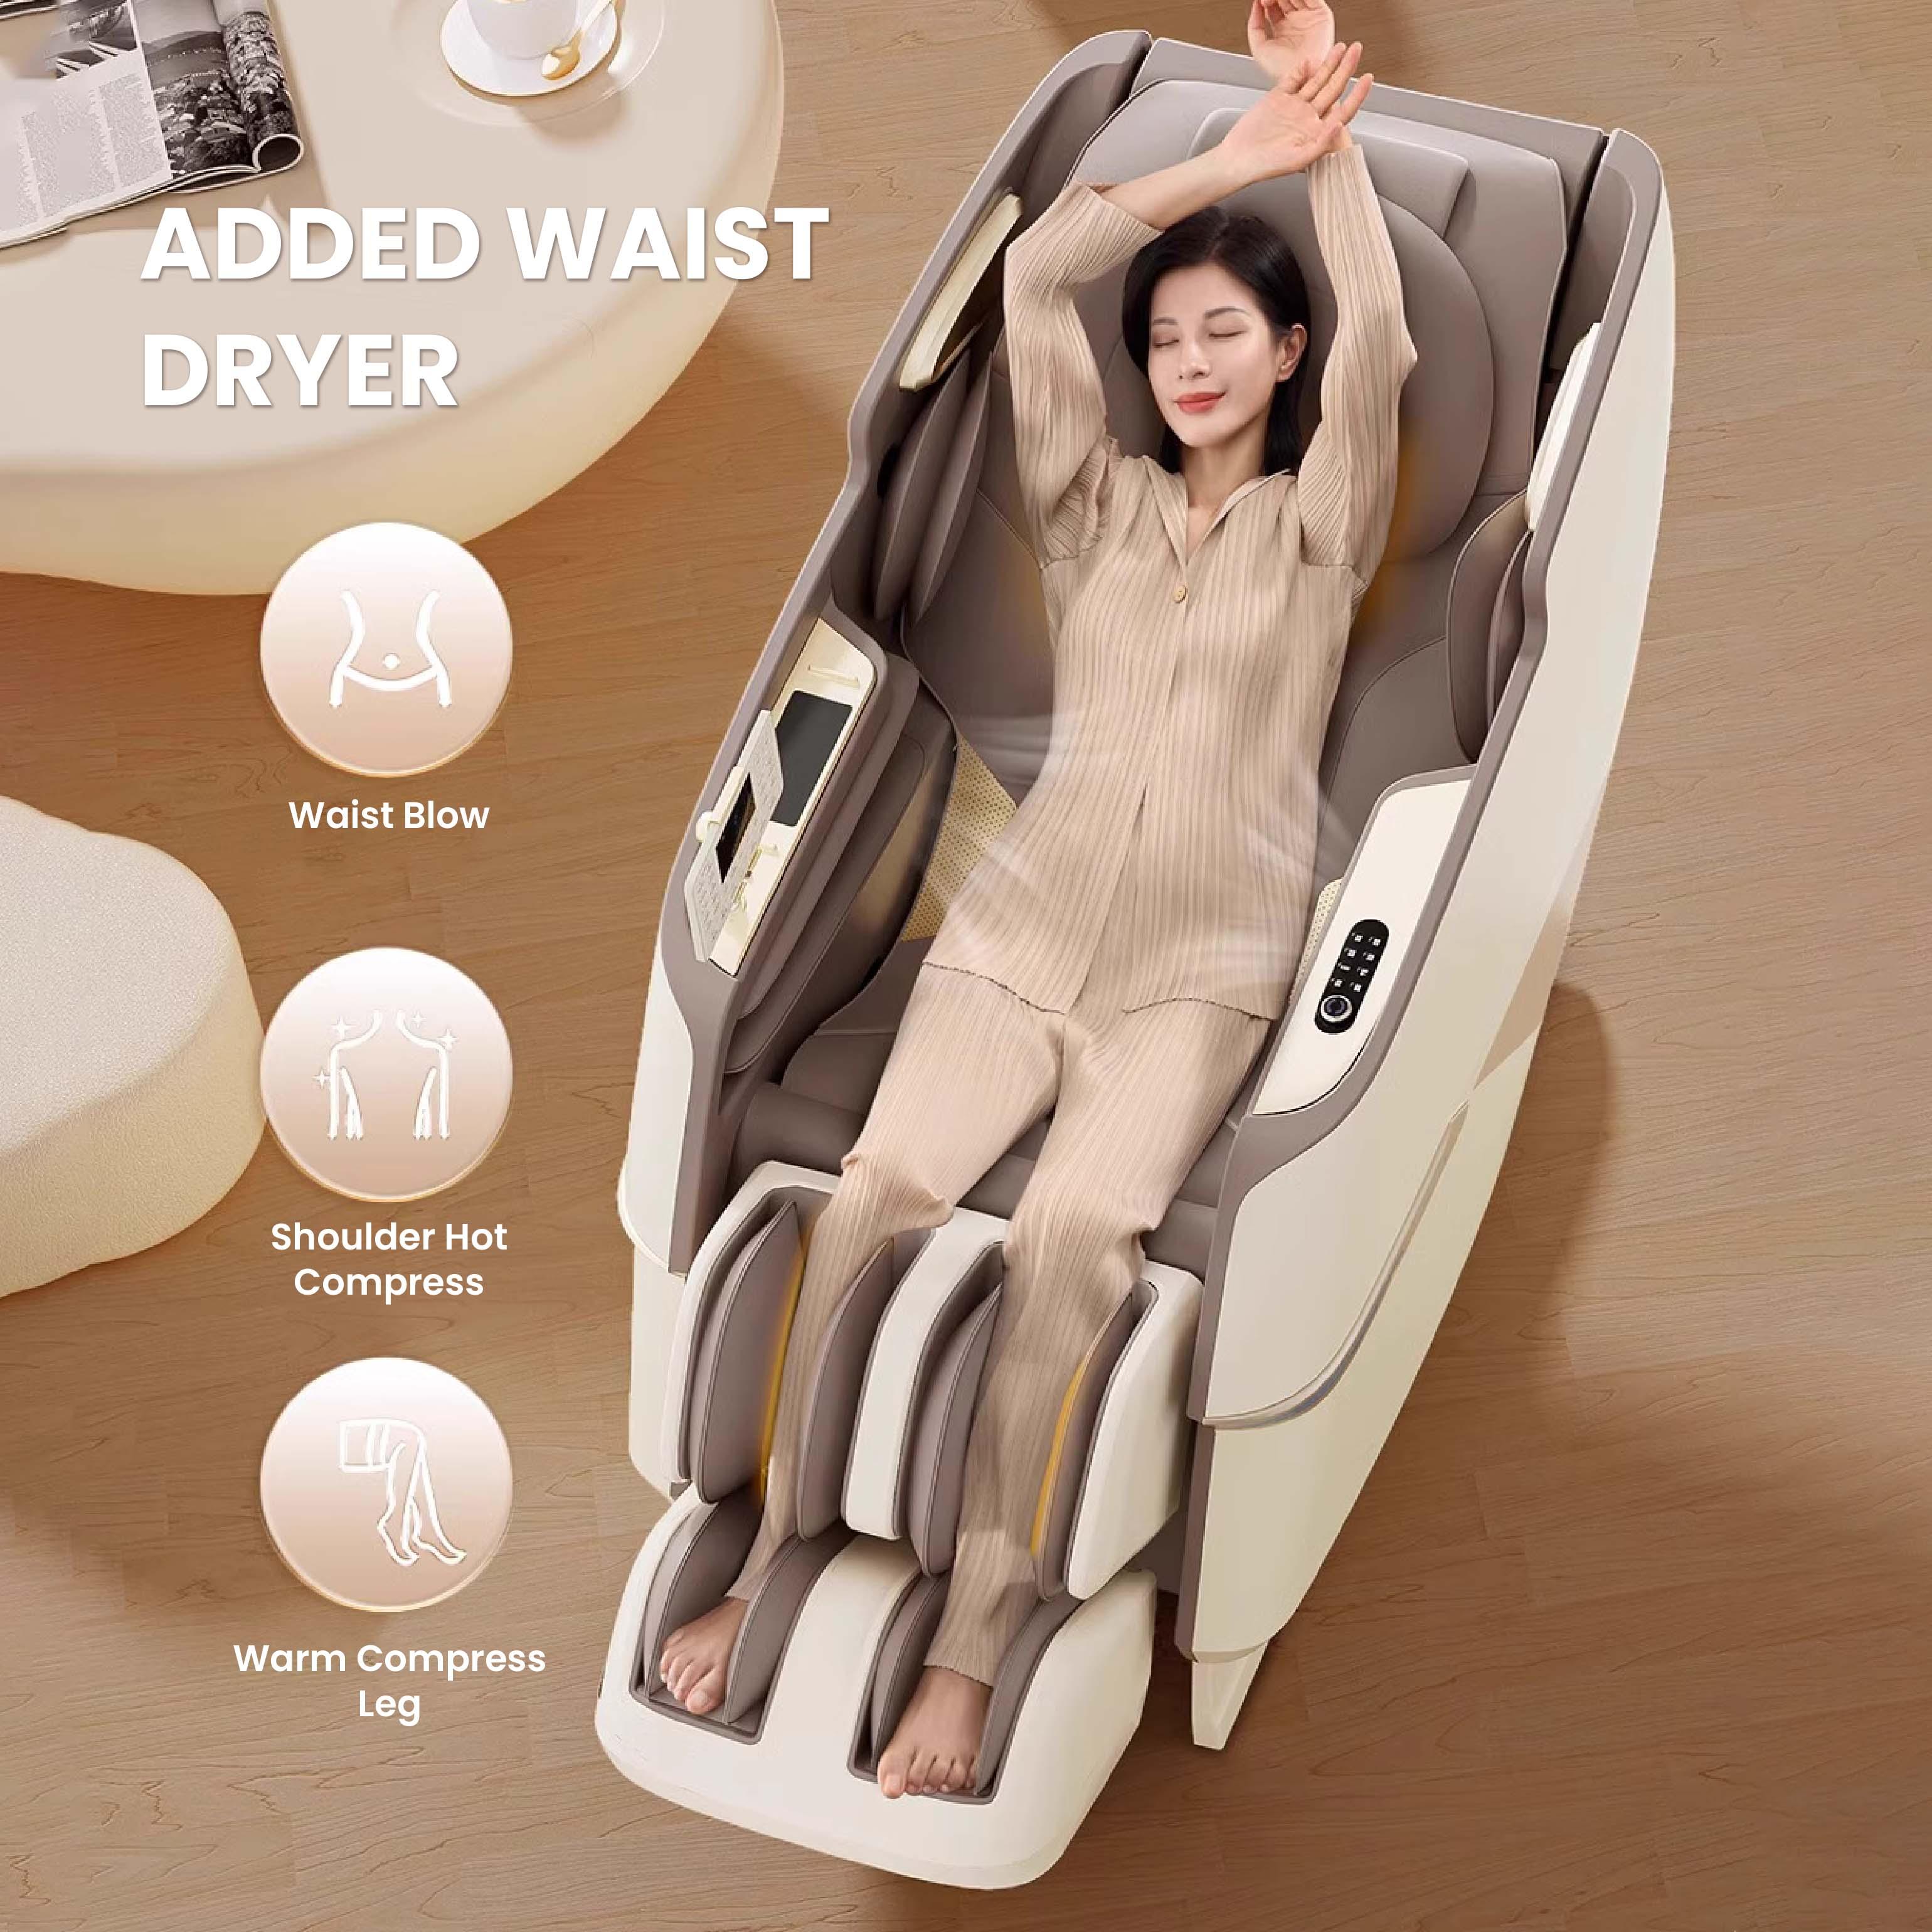 Woman relaxing on Royal Majestic Pro Massage Chair with added waist dryer, shoulder hot compress, and warm leg compress features